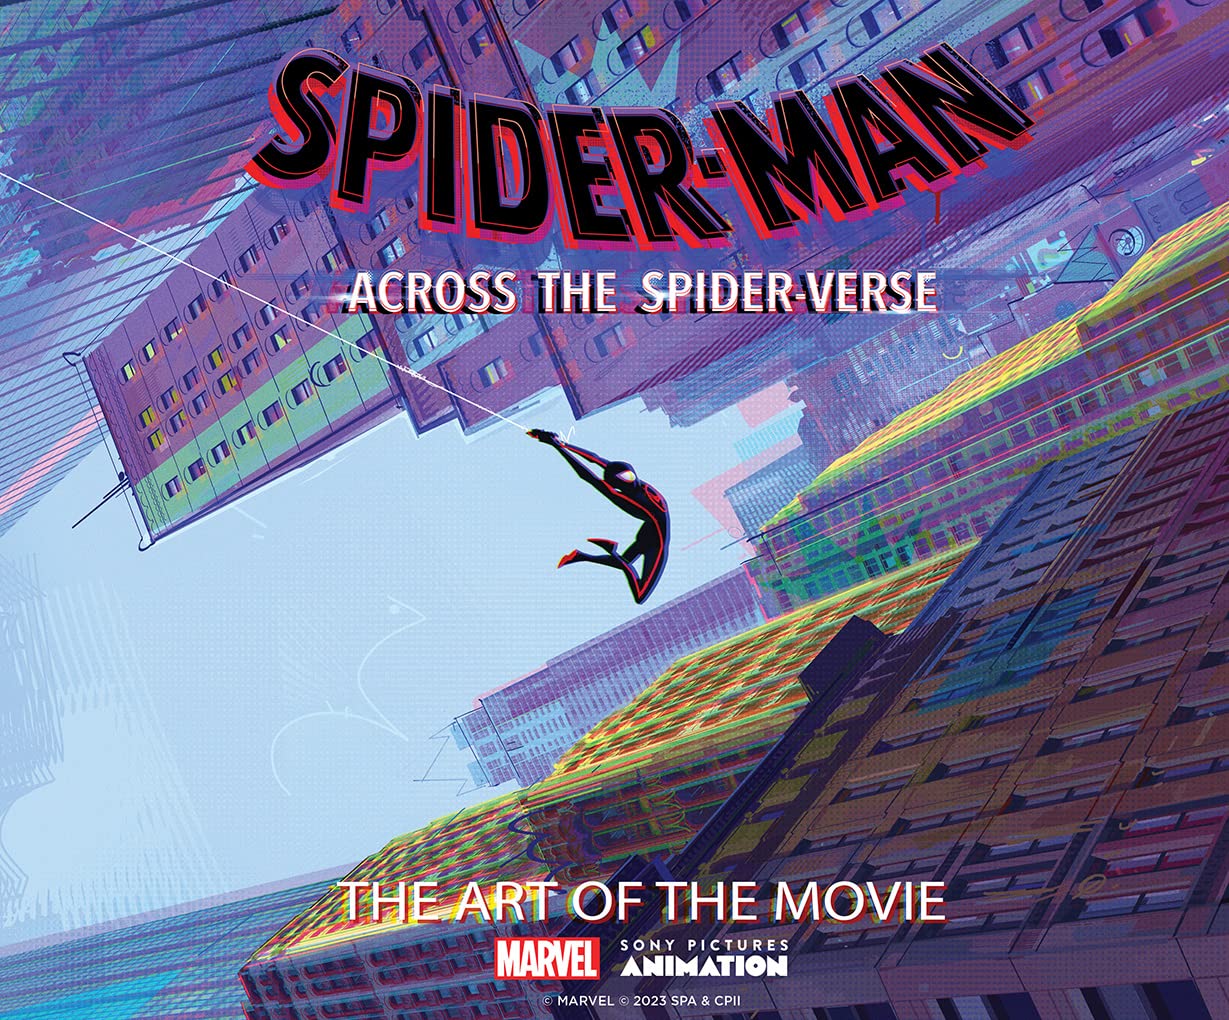 Spider-Man: Across the Spider-Verse Is Up For Preorder - IGN